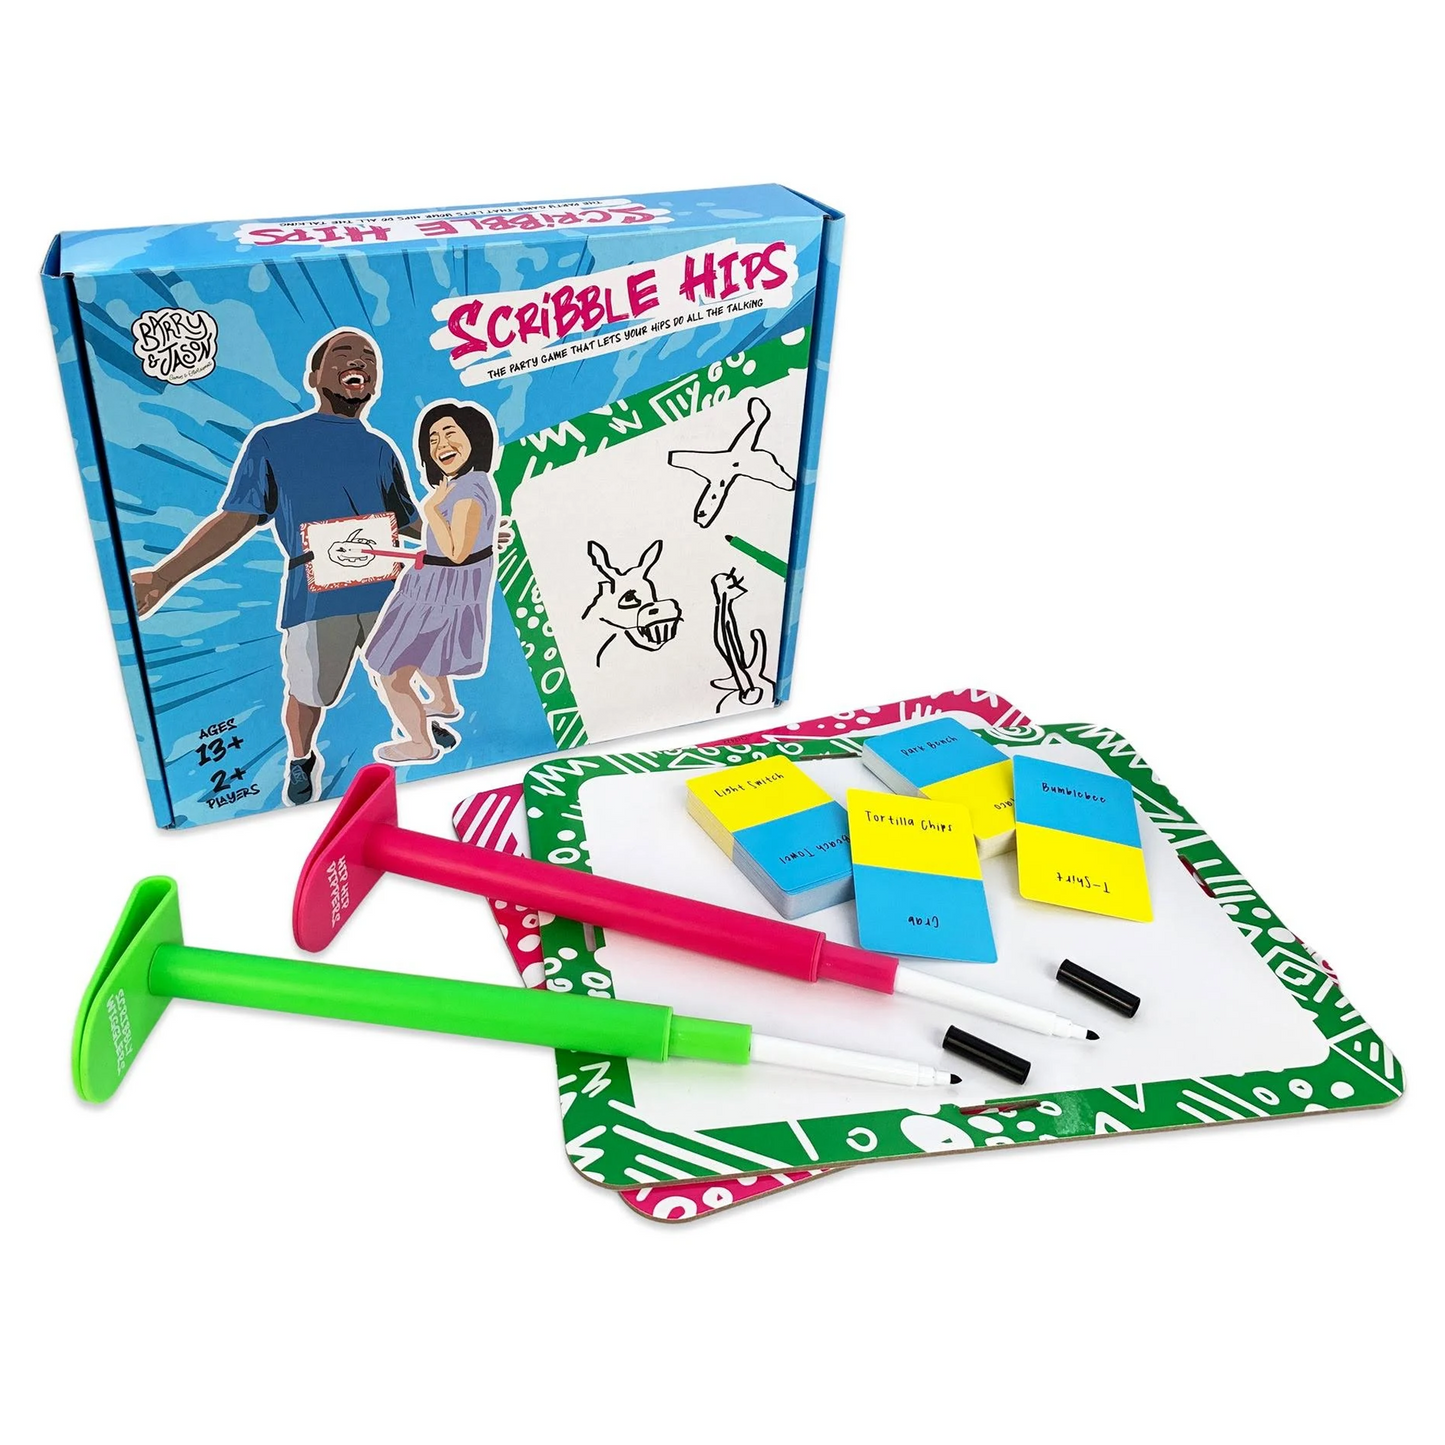 Scribble Hips Party Board Game Box and Contents | Happy Piranha